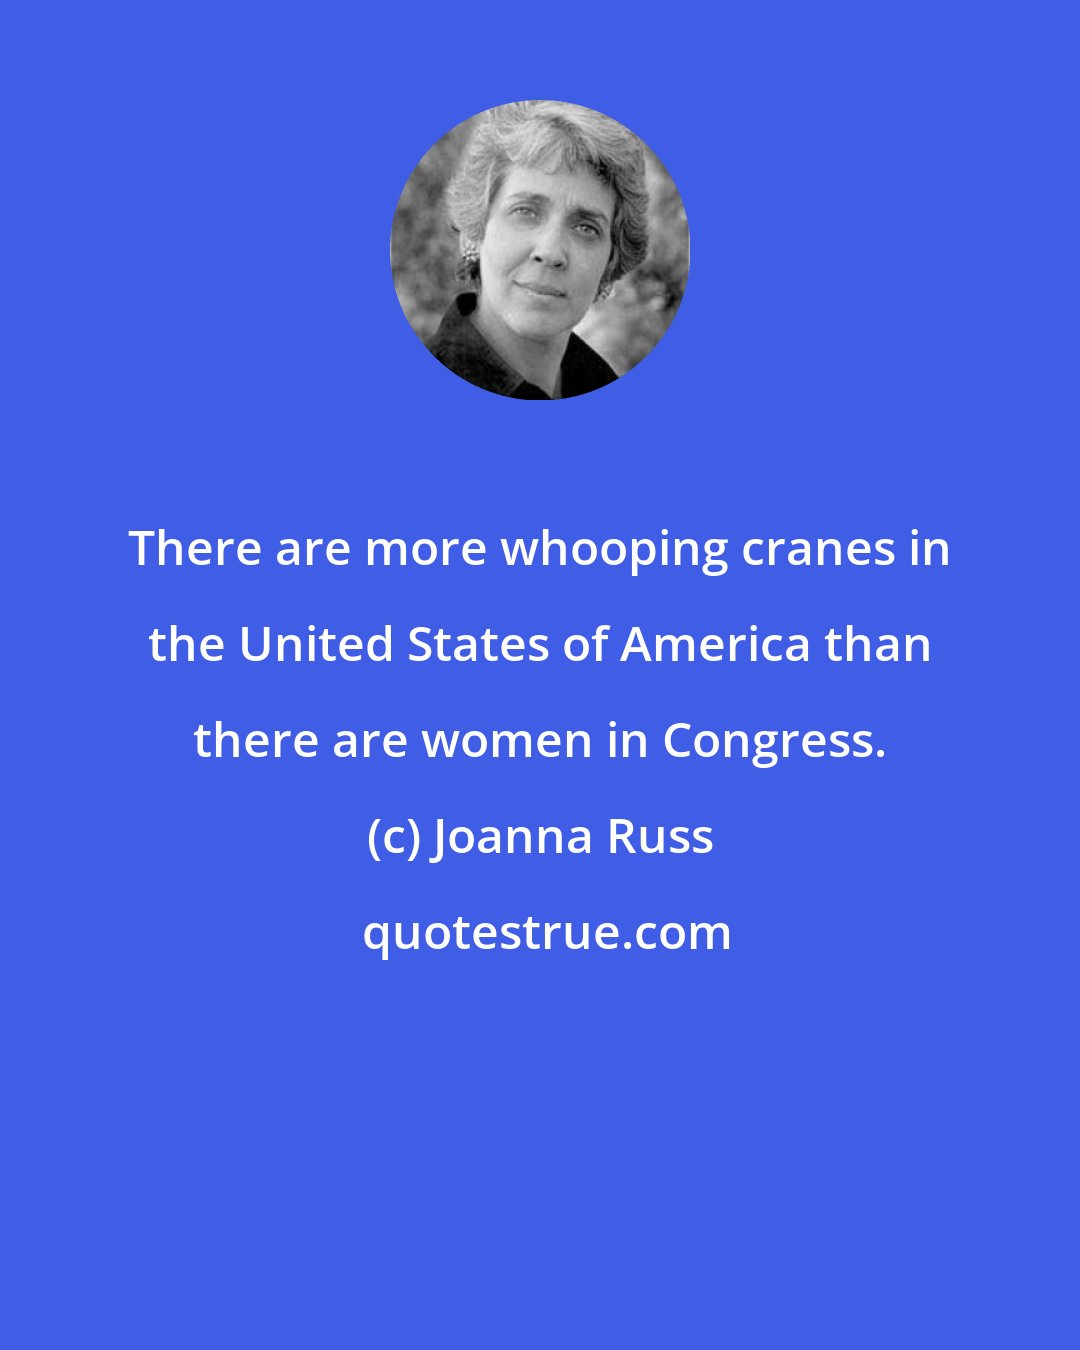 Joanna Russ: There are more whooping cranes in the United States of America than there are women in Congress.